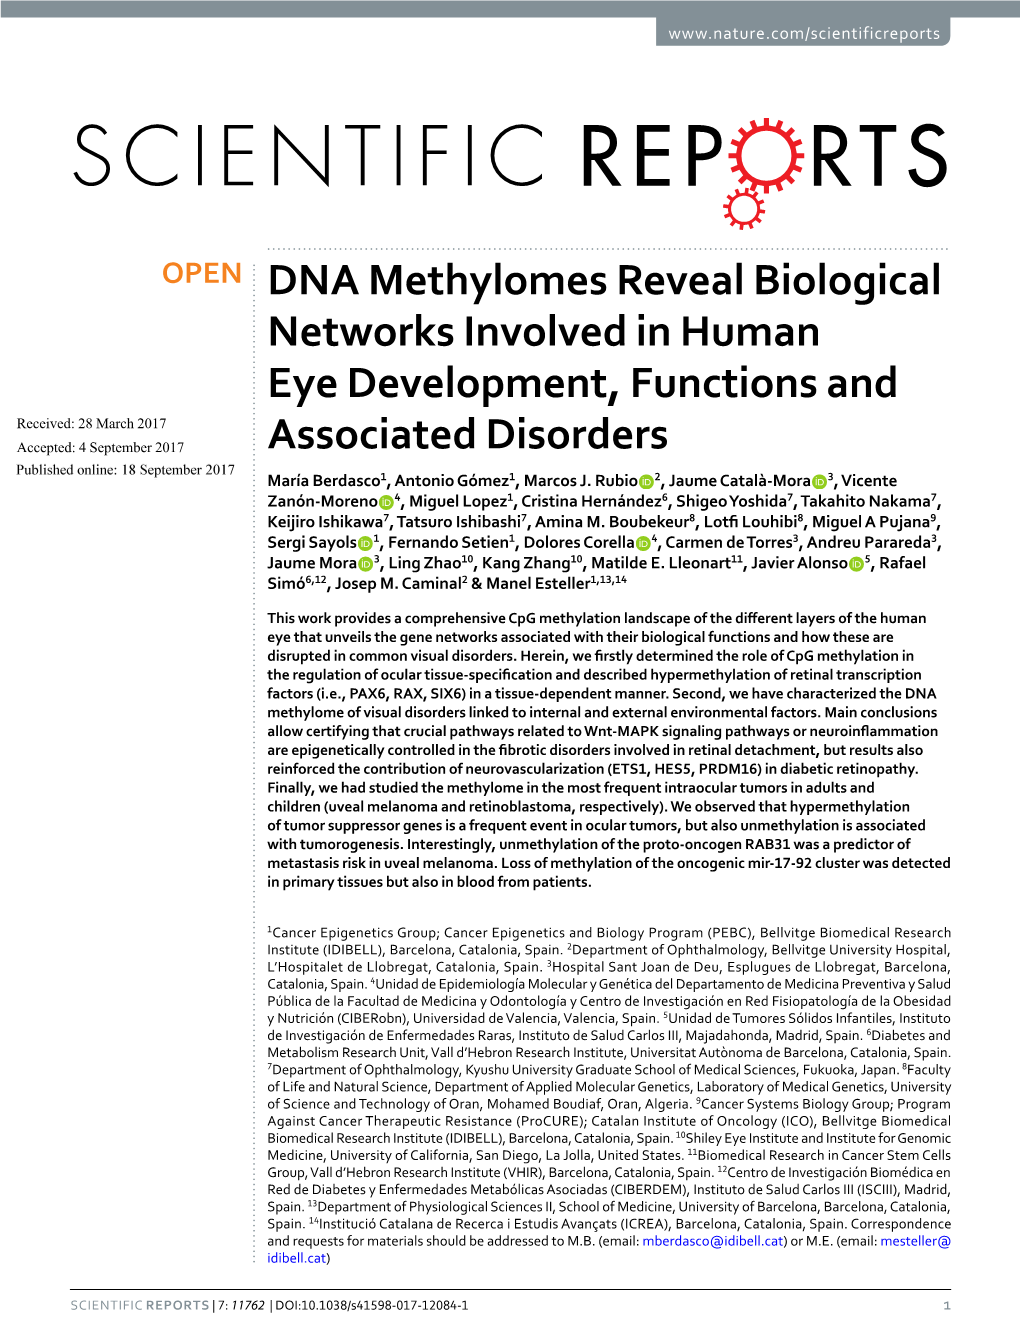 DNA Methylomes Reveal Biological Networks Involved in Human Eye Development, Functions and Associated Disorders